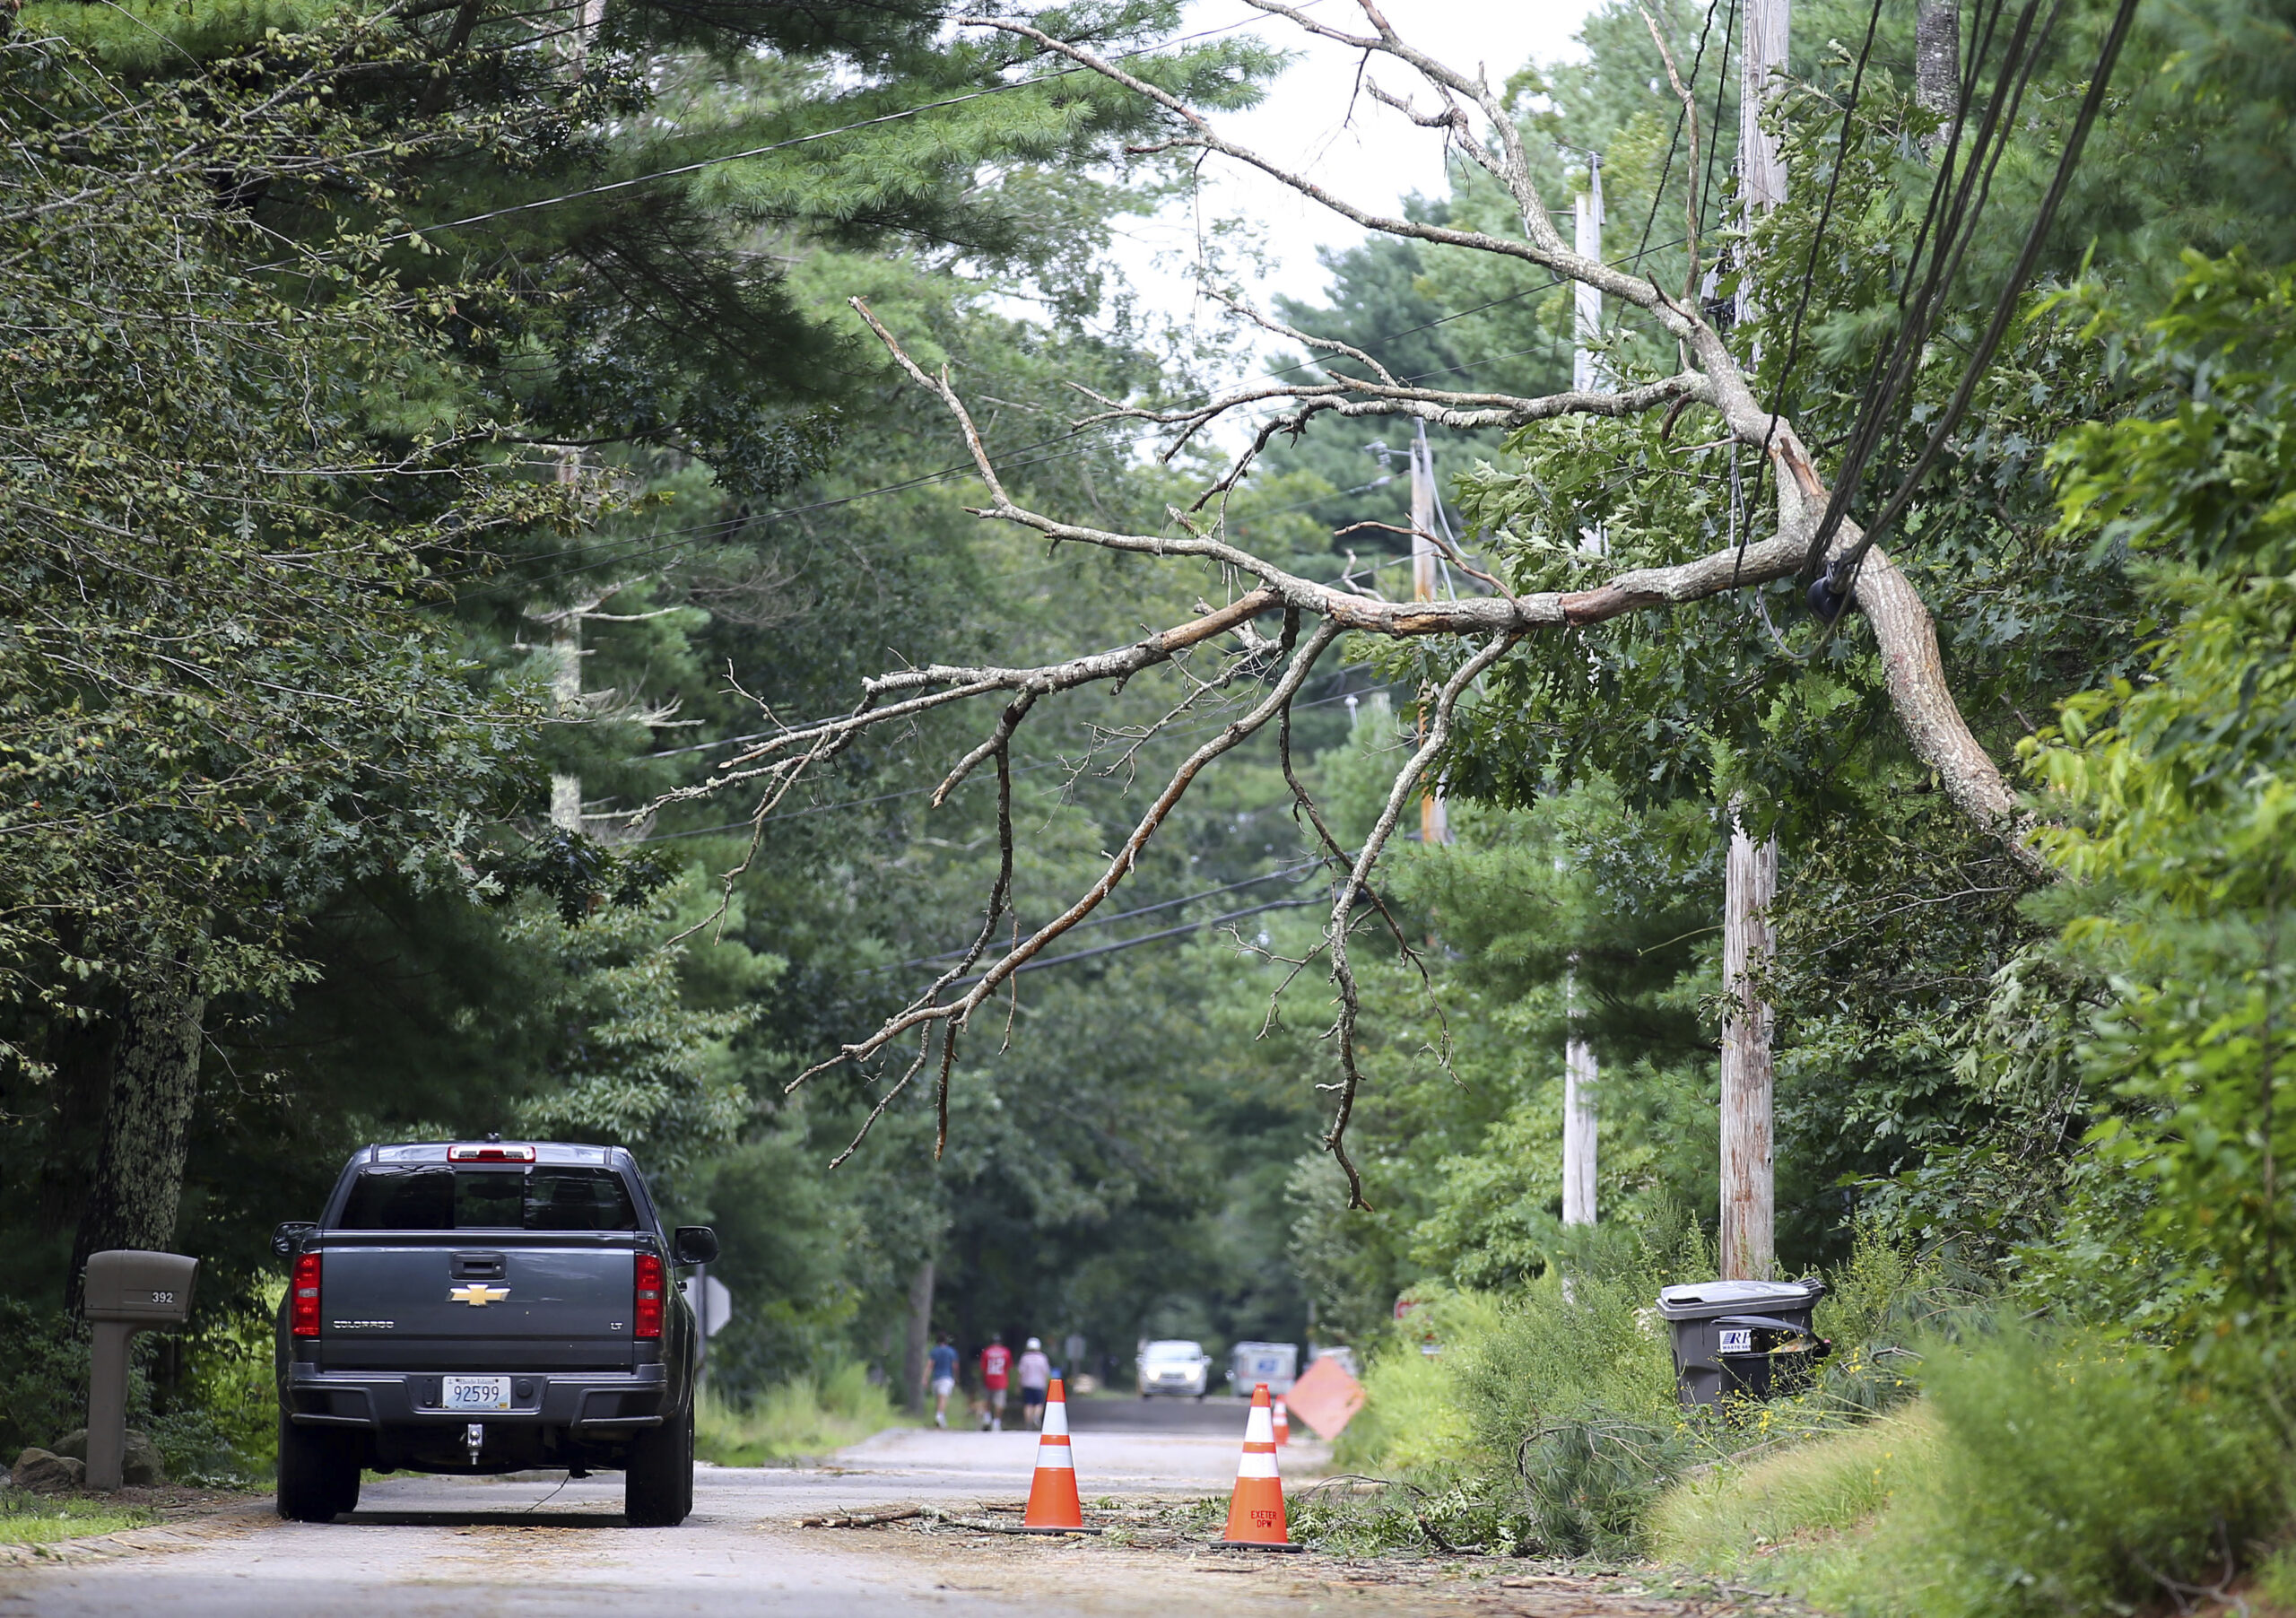 A truck goes around a tree that's fallen onto an electrical power line after a storm